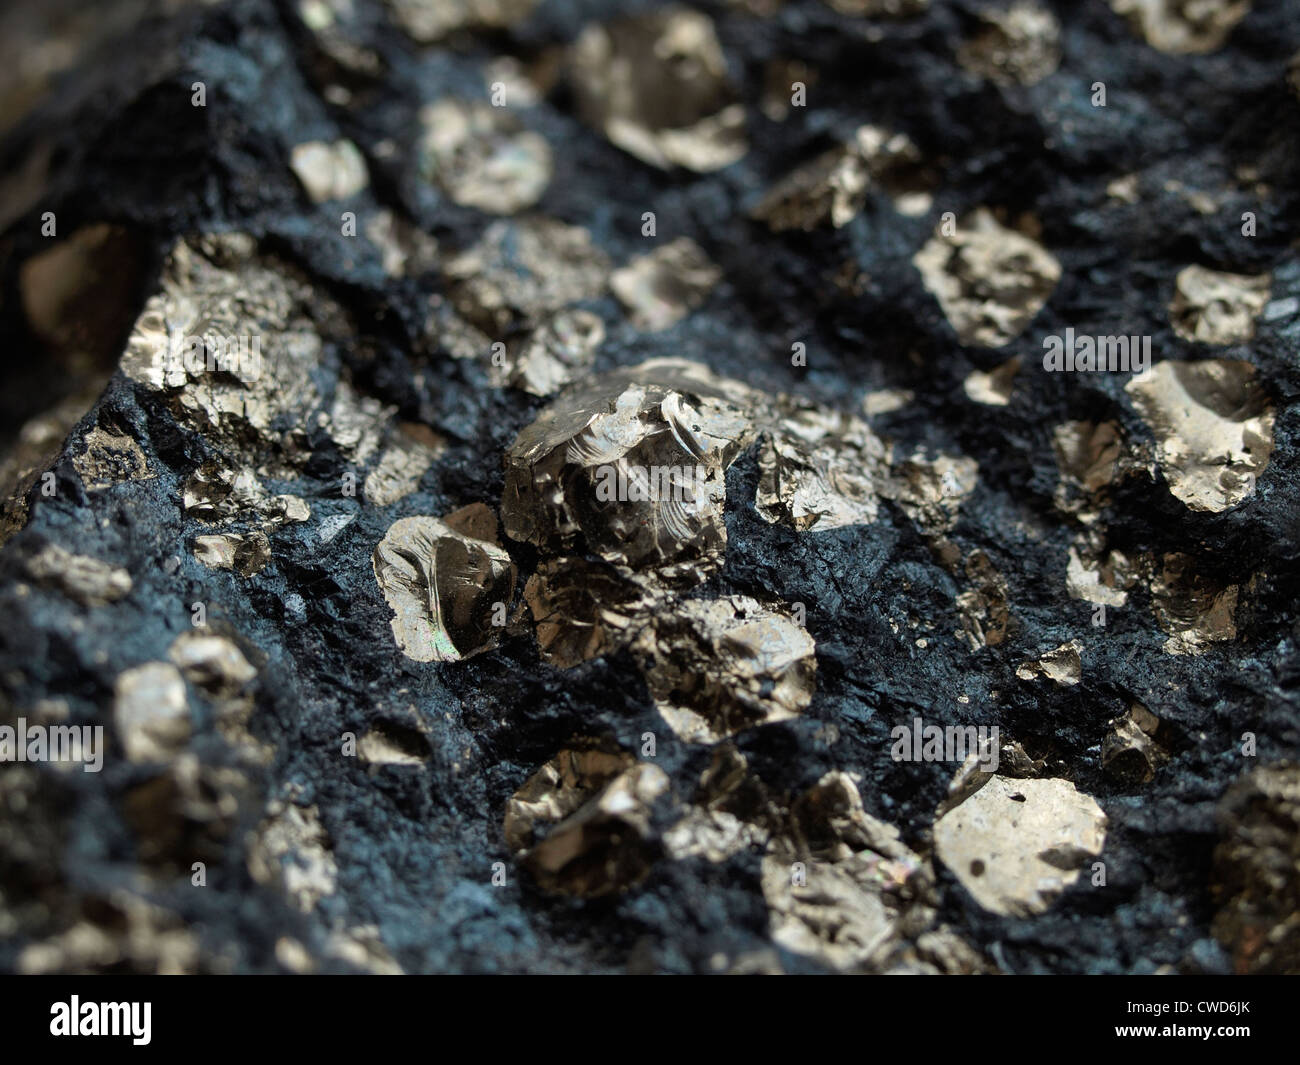 Pyrite embedded in chalcocite. Photograph covers area that is approximately 17 millimeters wide and 13 millimeters high. Stock Photo